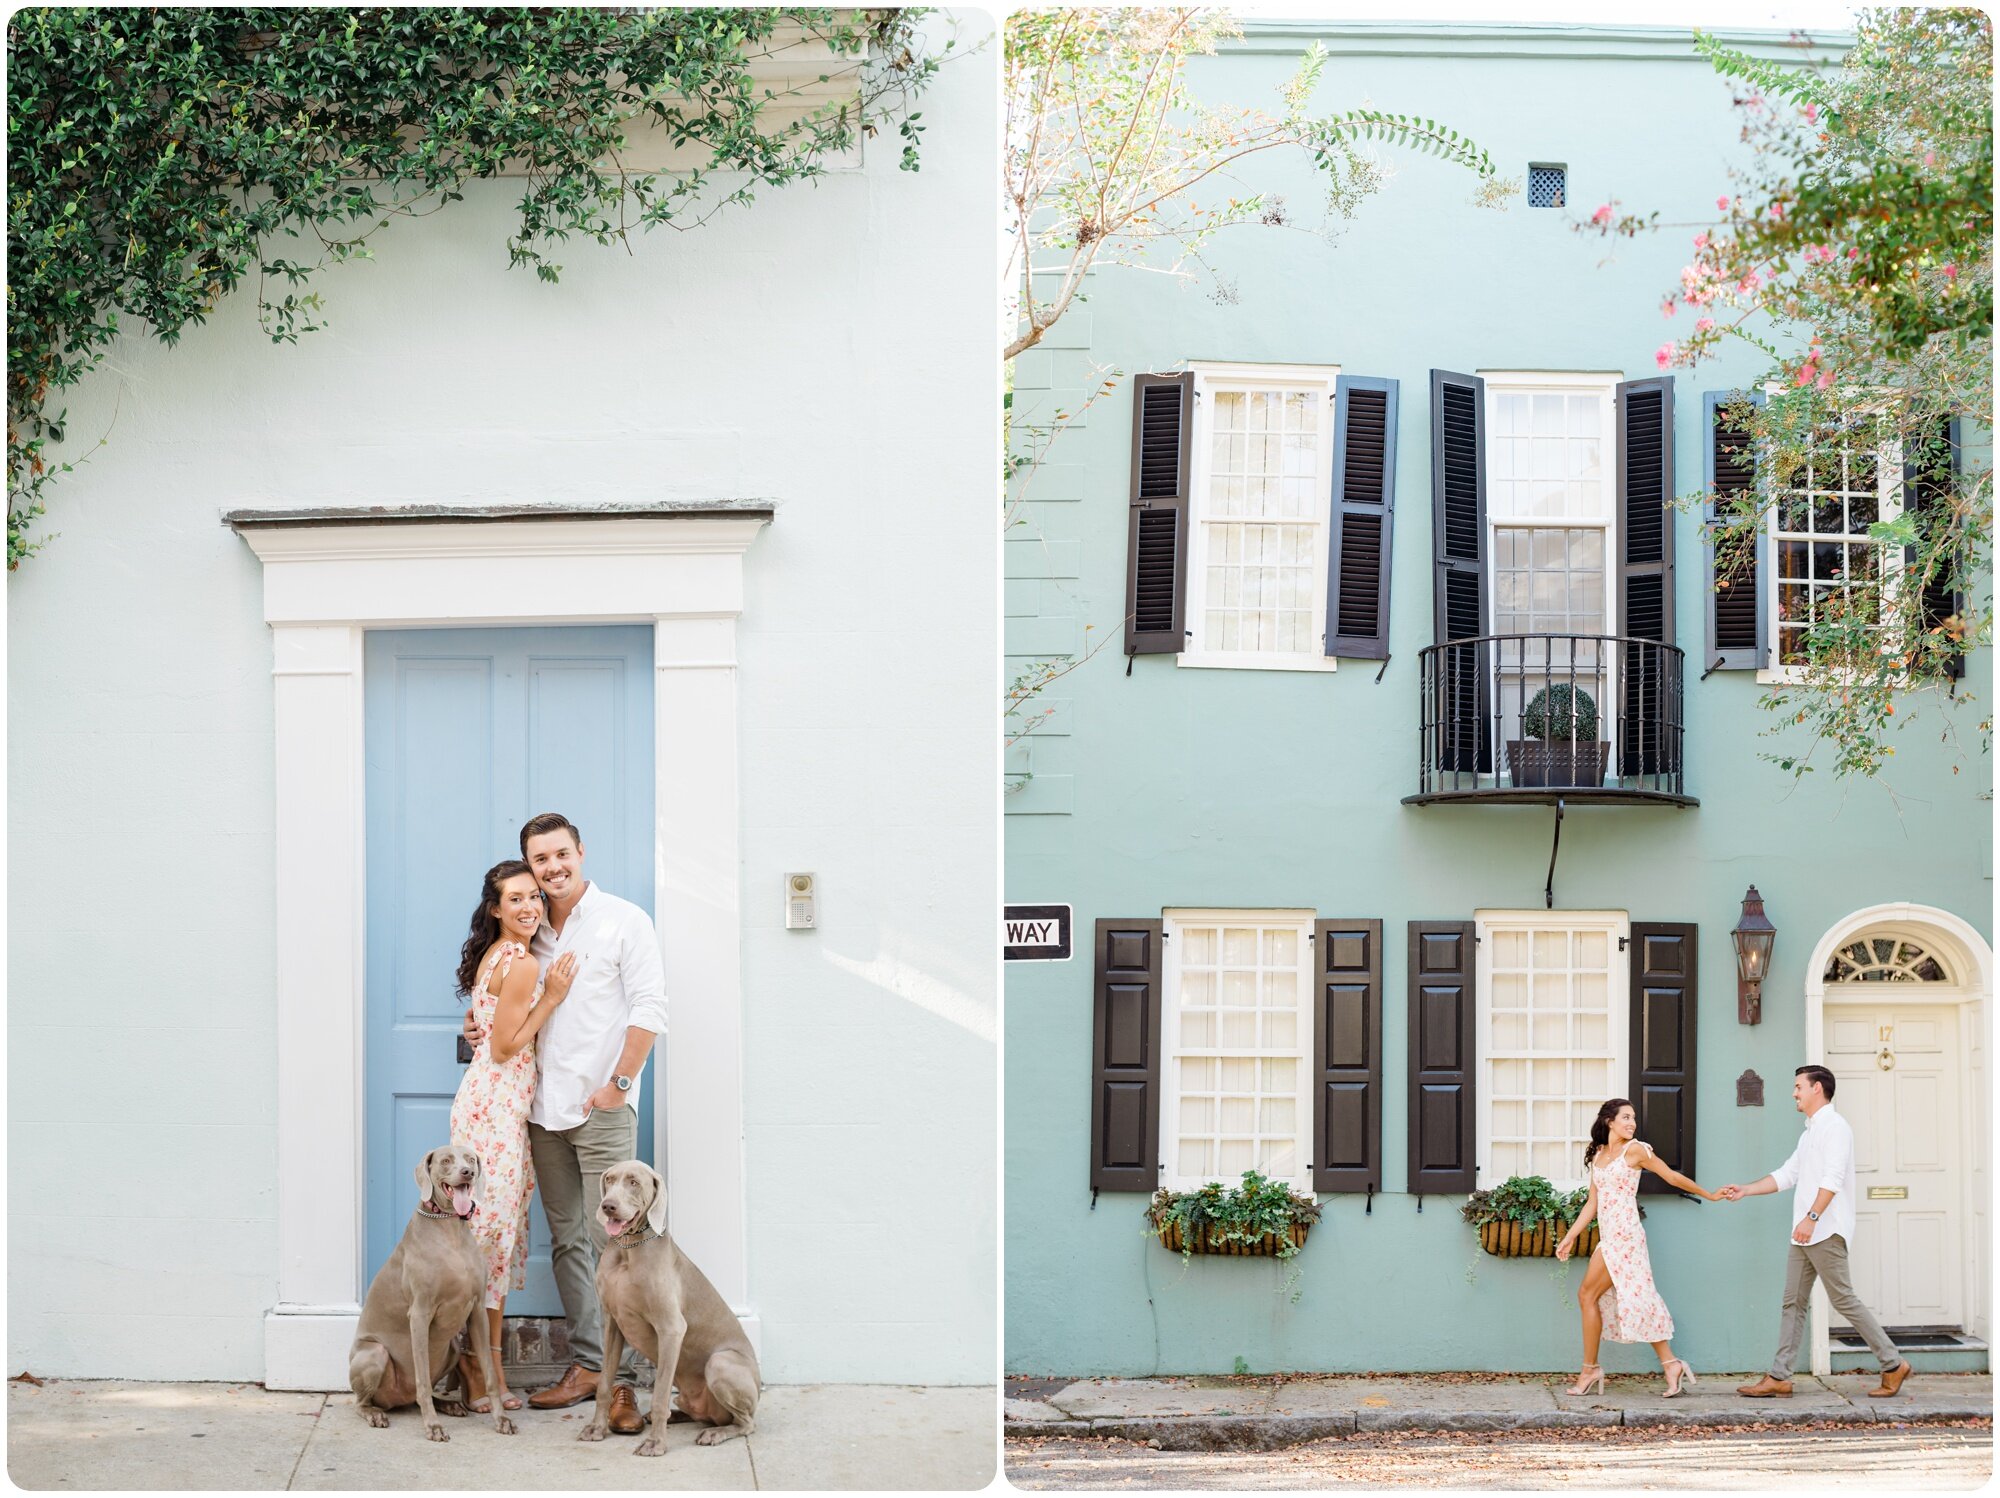 outdoor_engagement_session_candid_natural_charleston_destination_wedding_rainbow_row_colorful_kailee_dimeglio_photography_0007.jpg